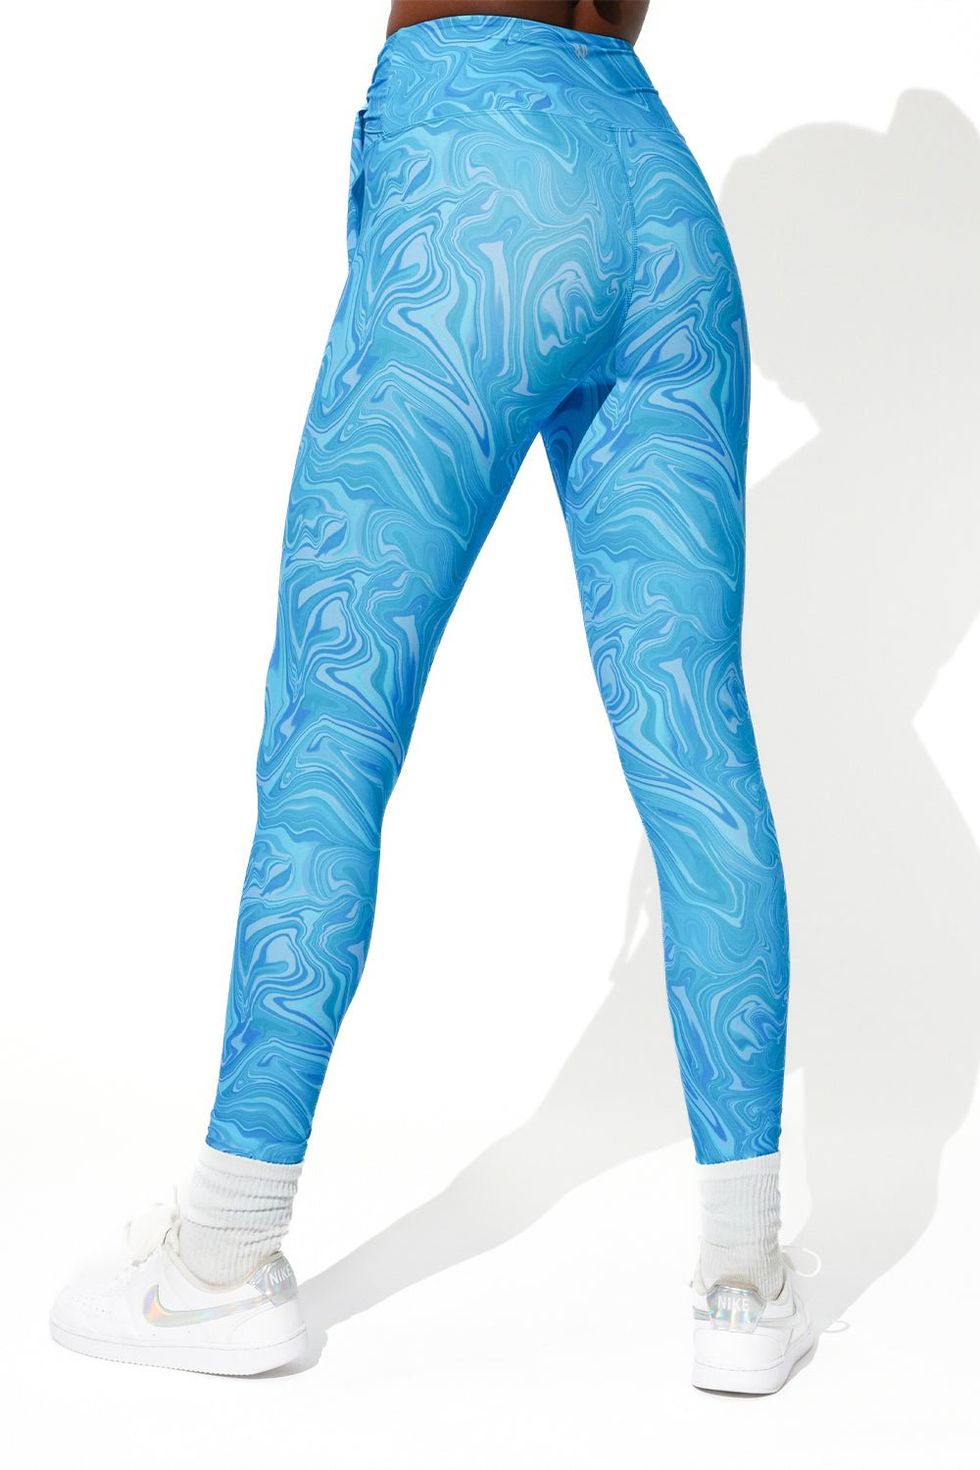 These non-pilling leggings repel lint and pet hair - and they all